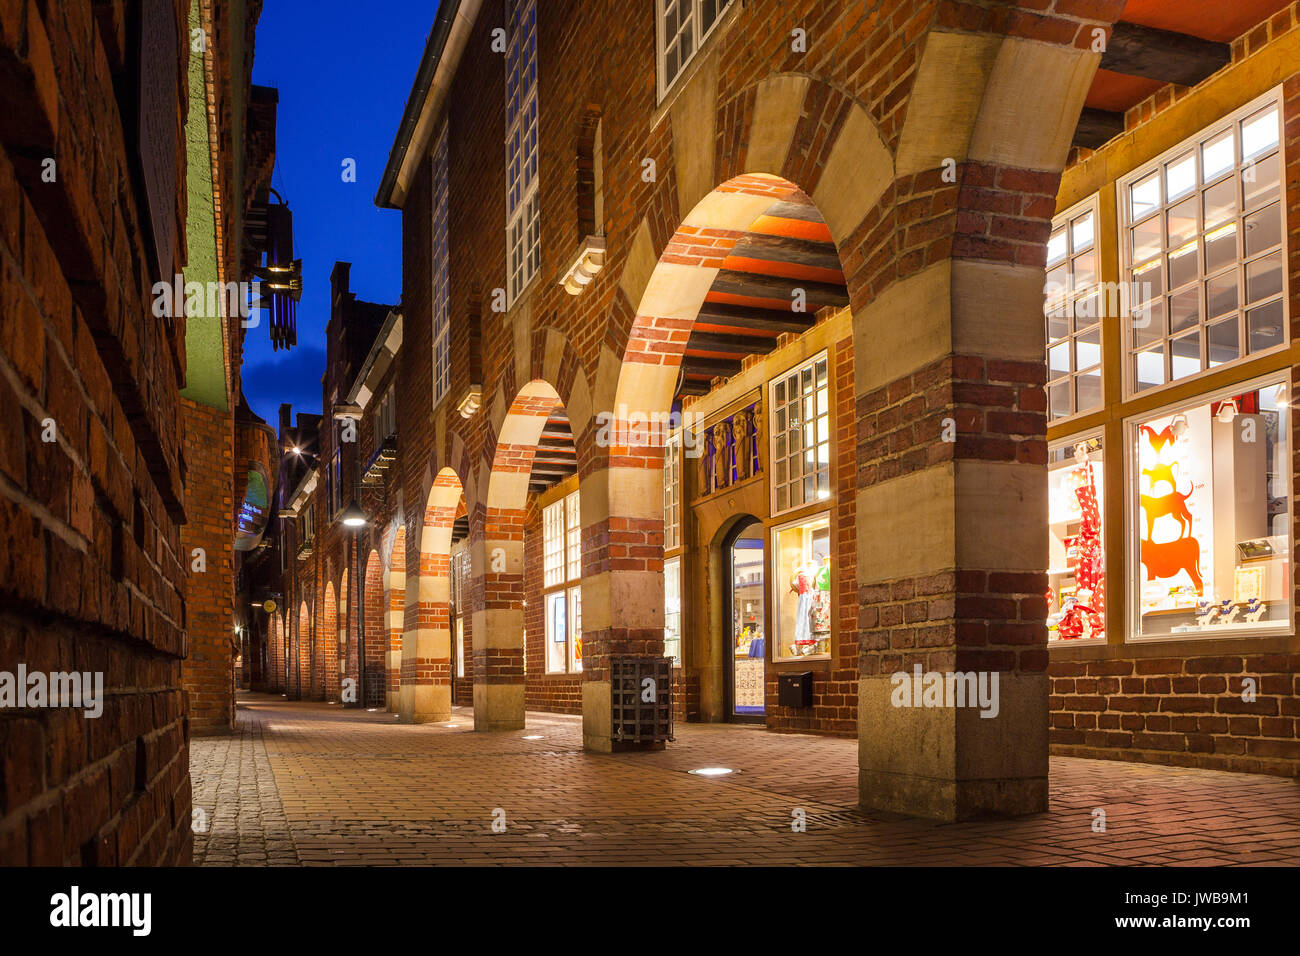 BREMEN, GERMANY - 16 APR 2016: Boettcherstreet by night in Bremen. Only about 100 m long, it is famous for its unusual architecture and ranks among the citys main cultural landmarks. Stock Photo